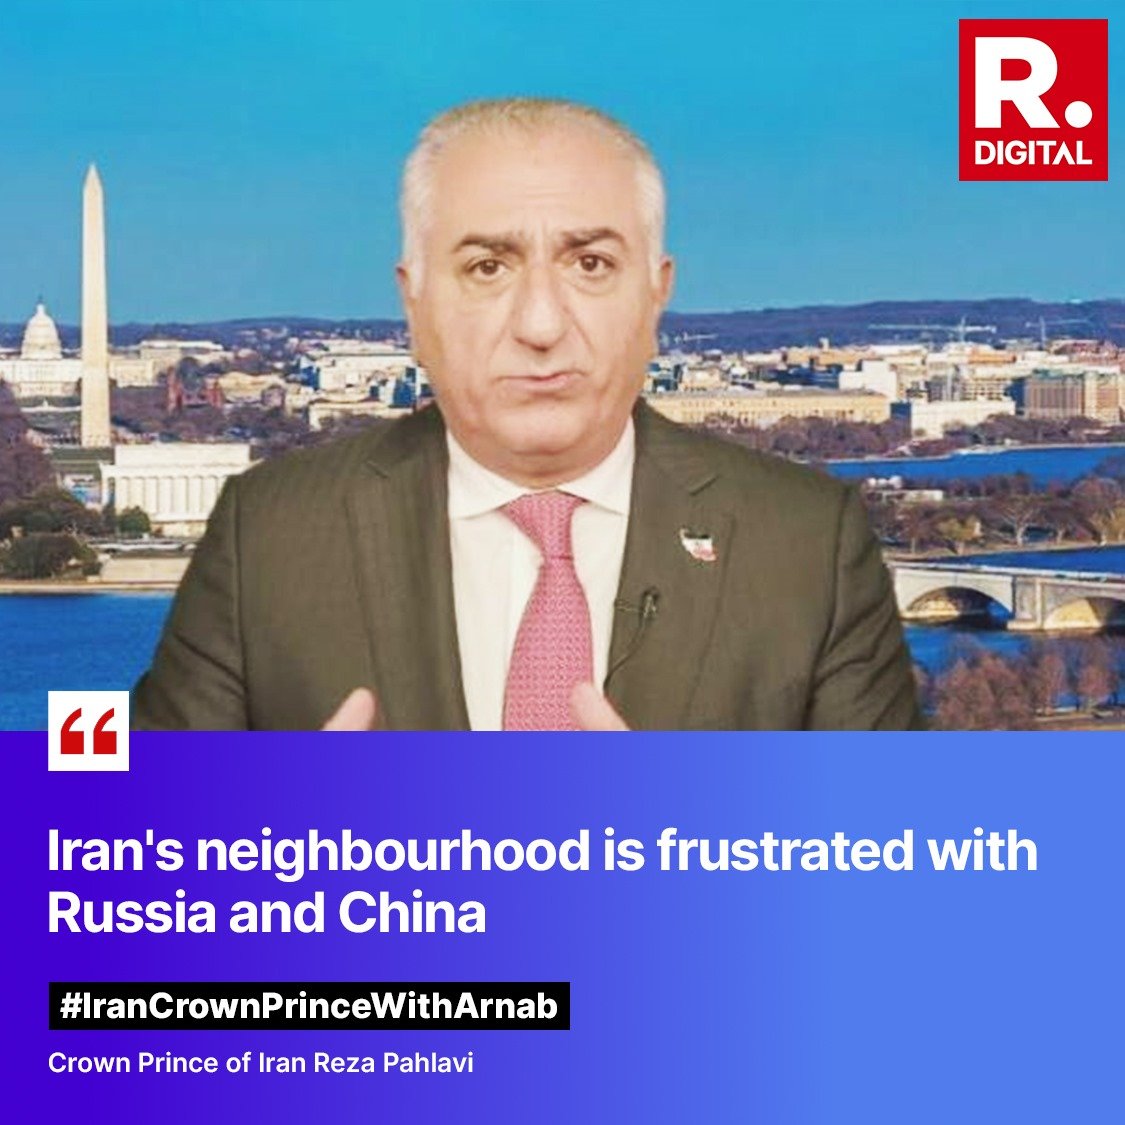 MEGA WORLD EXCLUSIVE #IranCrownPrinceWithArnab | 'The regime takes ransom money for hostages.' Watch Crown Prince of Iran Reza Pahlavi (@PahlaviReza) on Nation Wants to Know with Arnab - youtube.com/watch?v=LB1C8z… #Iran #Israel #RezaPahlavi #IranIsraelConflict #NationWantsToKnow